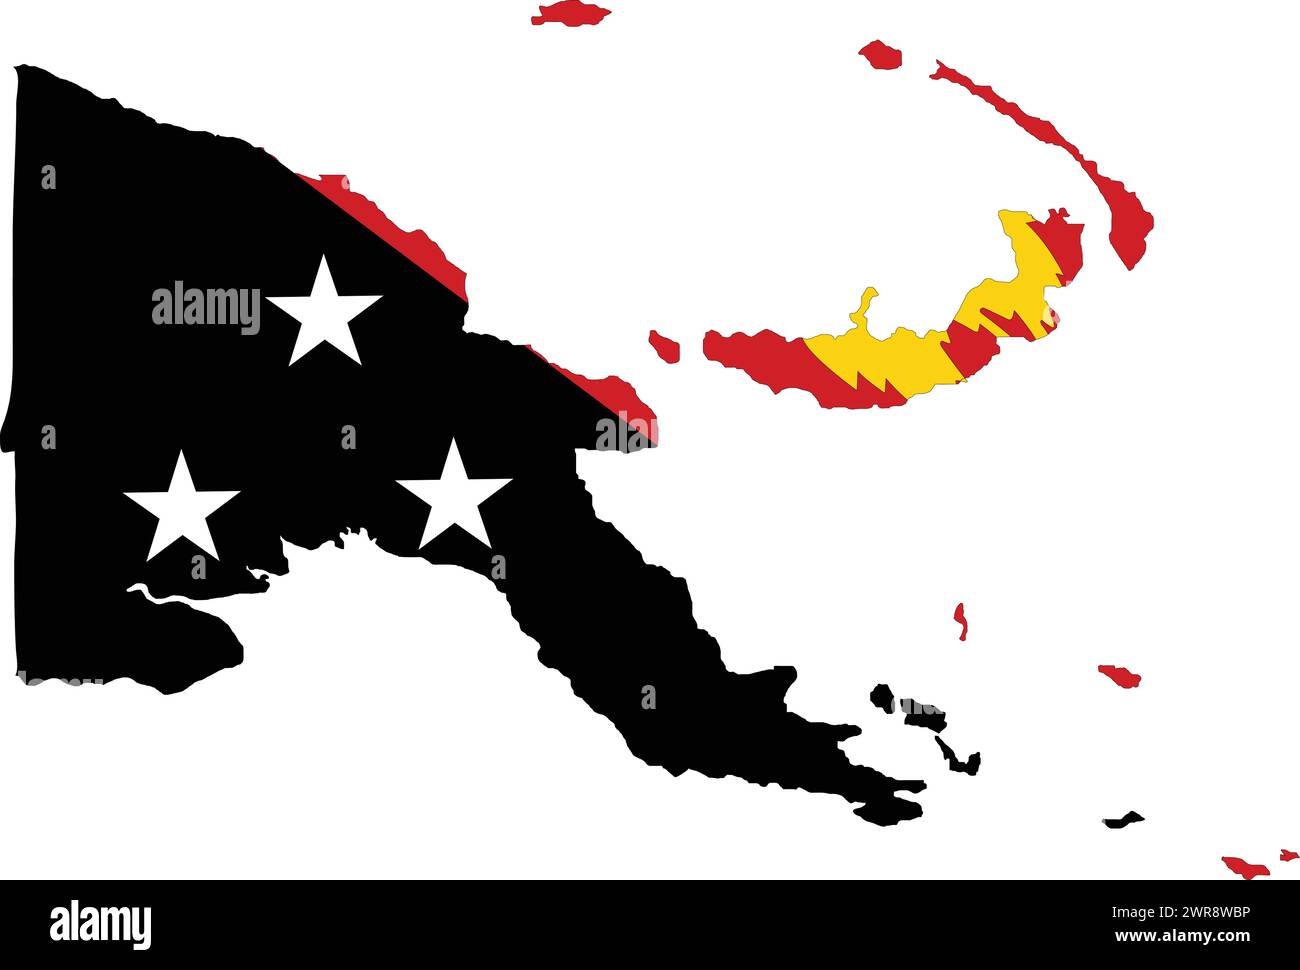 Papua New Guine Flag in Papua New Guine Map, Papua New Guine Map with Flag, Country Map, Papua New Guine with Flag, Nation Flag Stock Vector